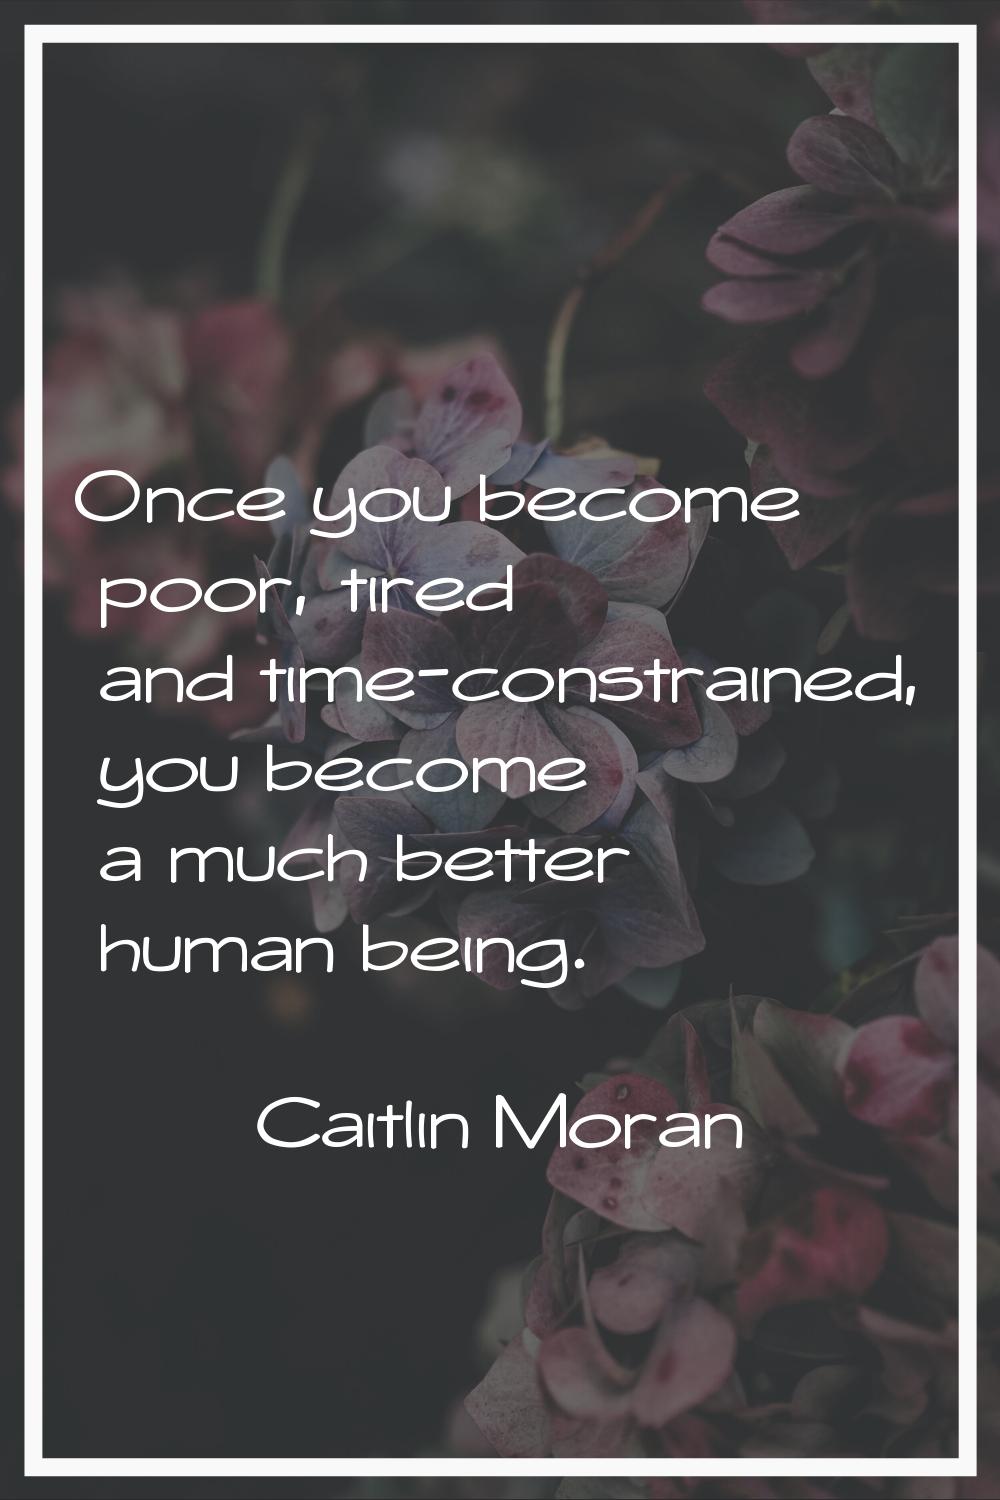 Once you become poor, tired and time-constrained, you become a much better human being.